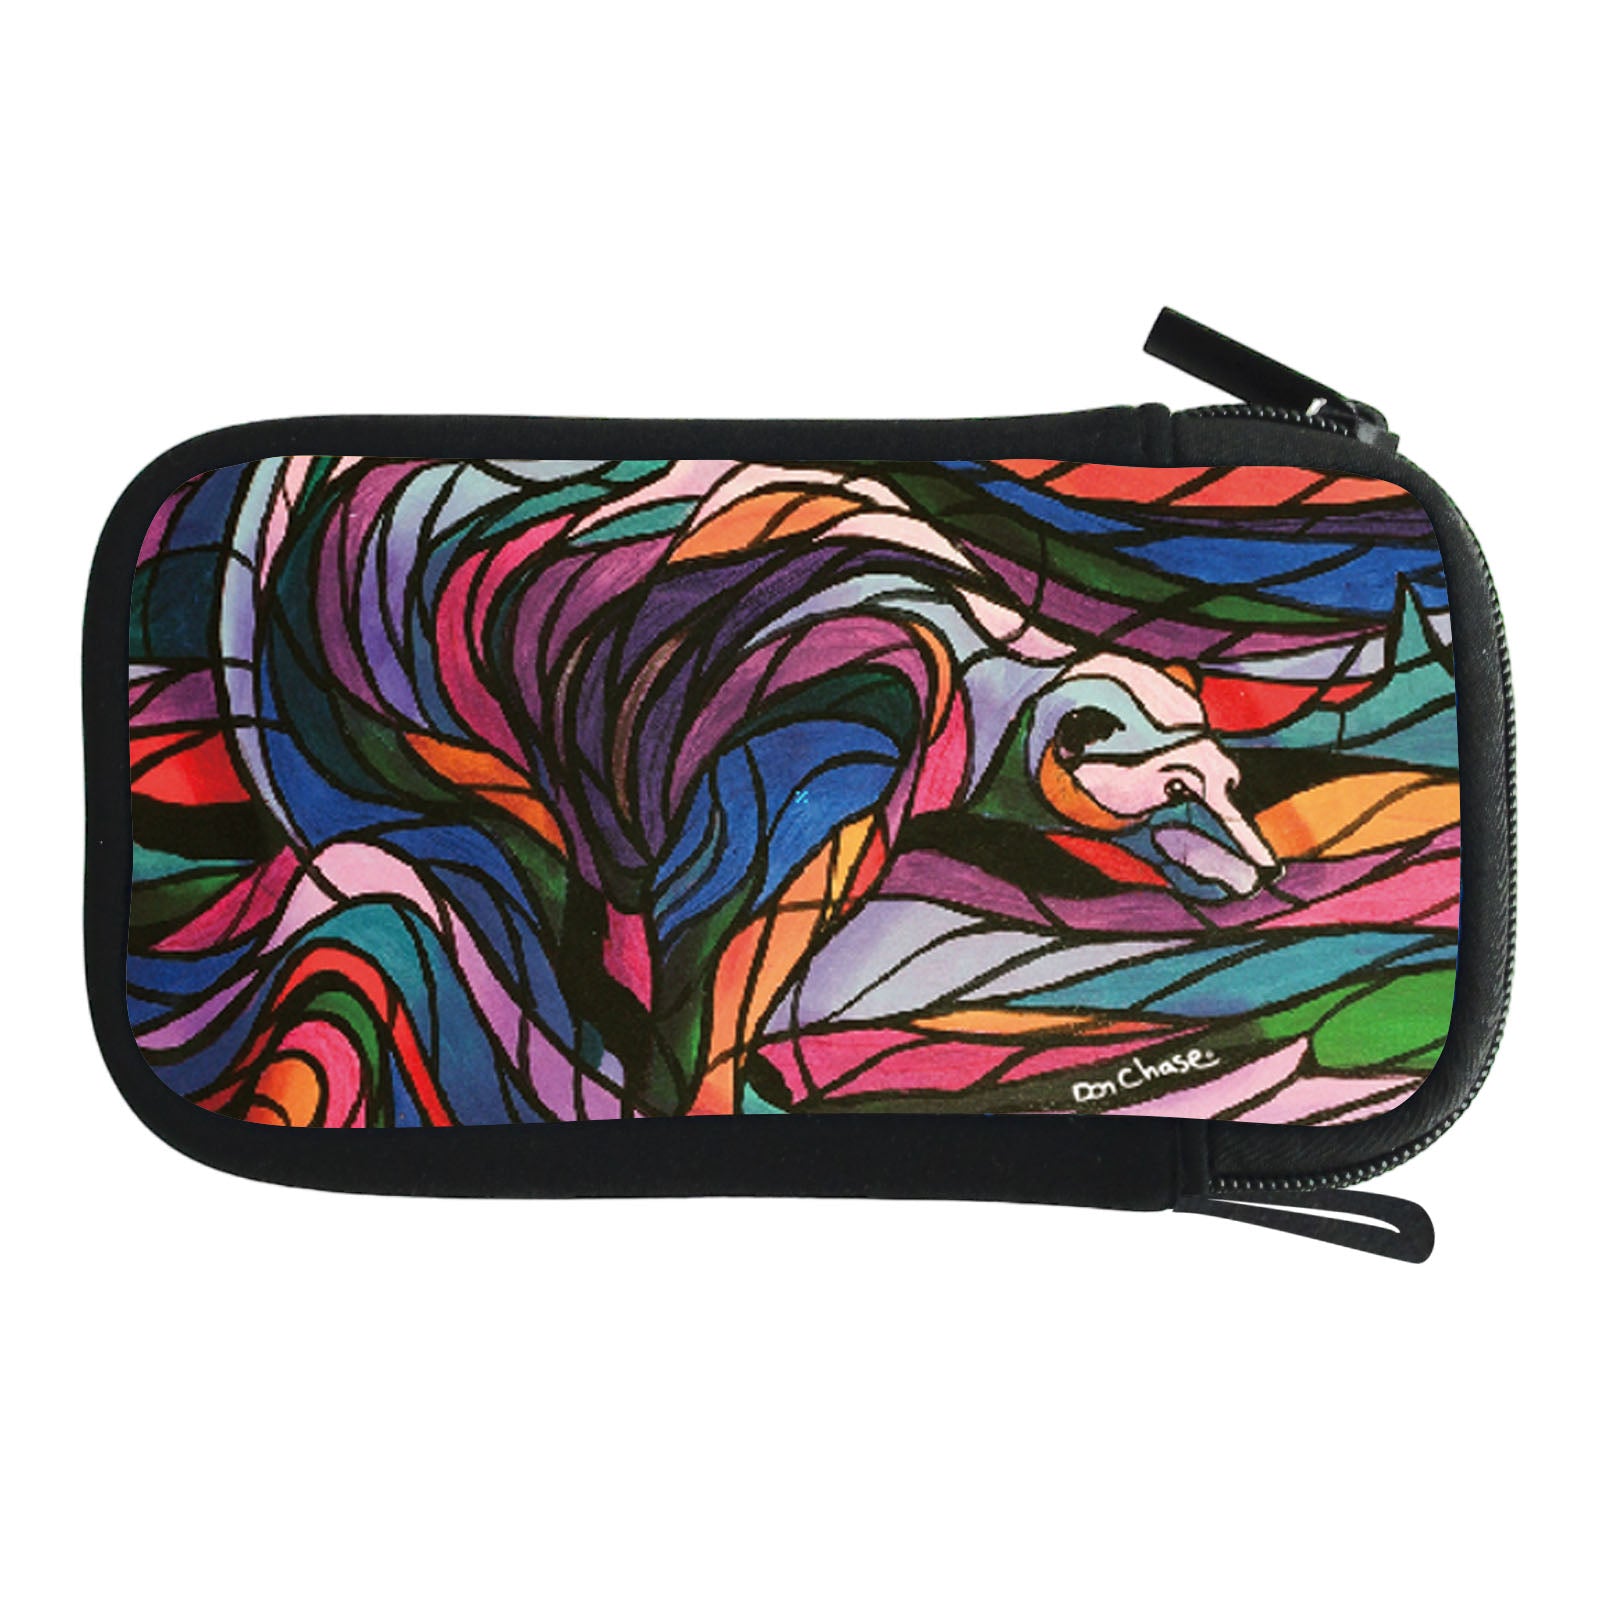 Don Chase Salmon Hunter Accessories Case